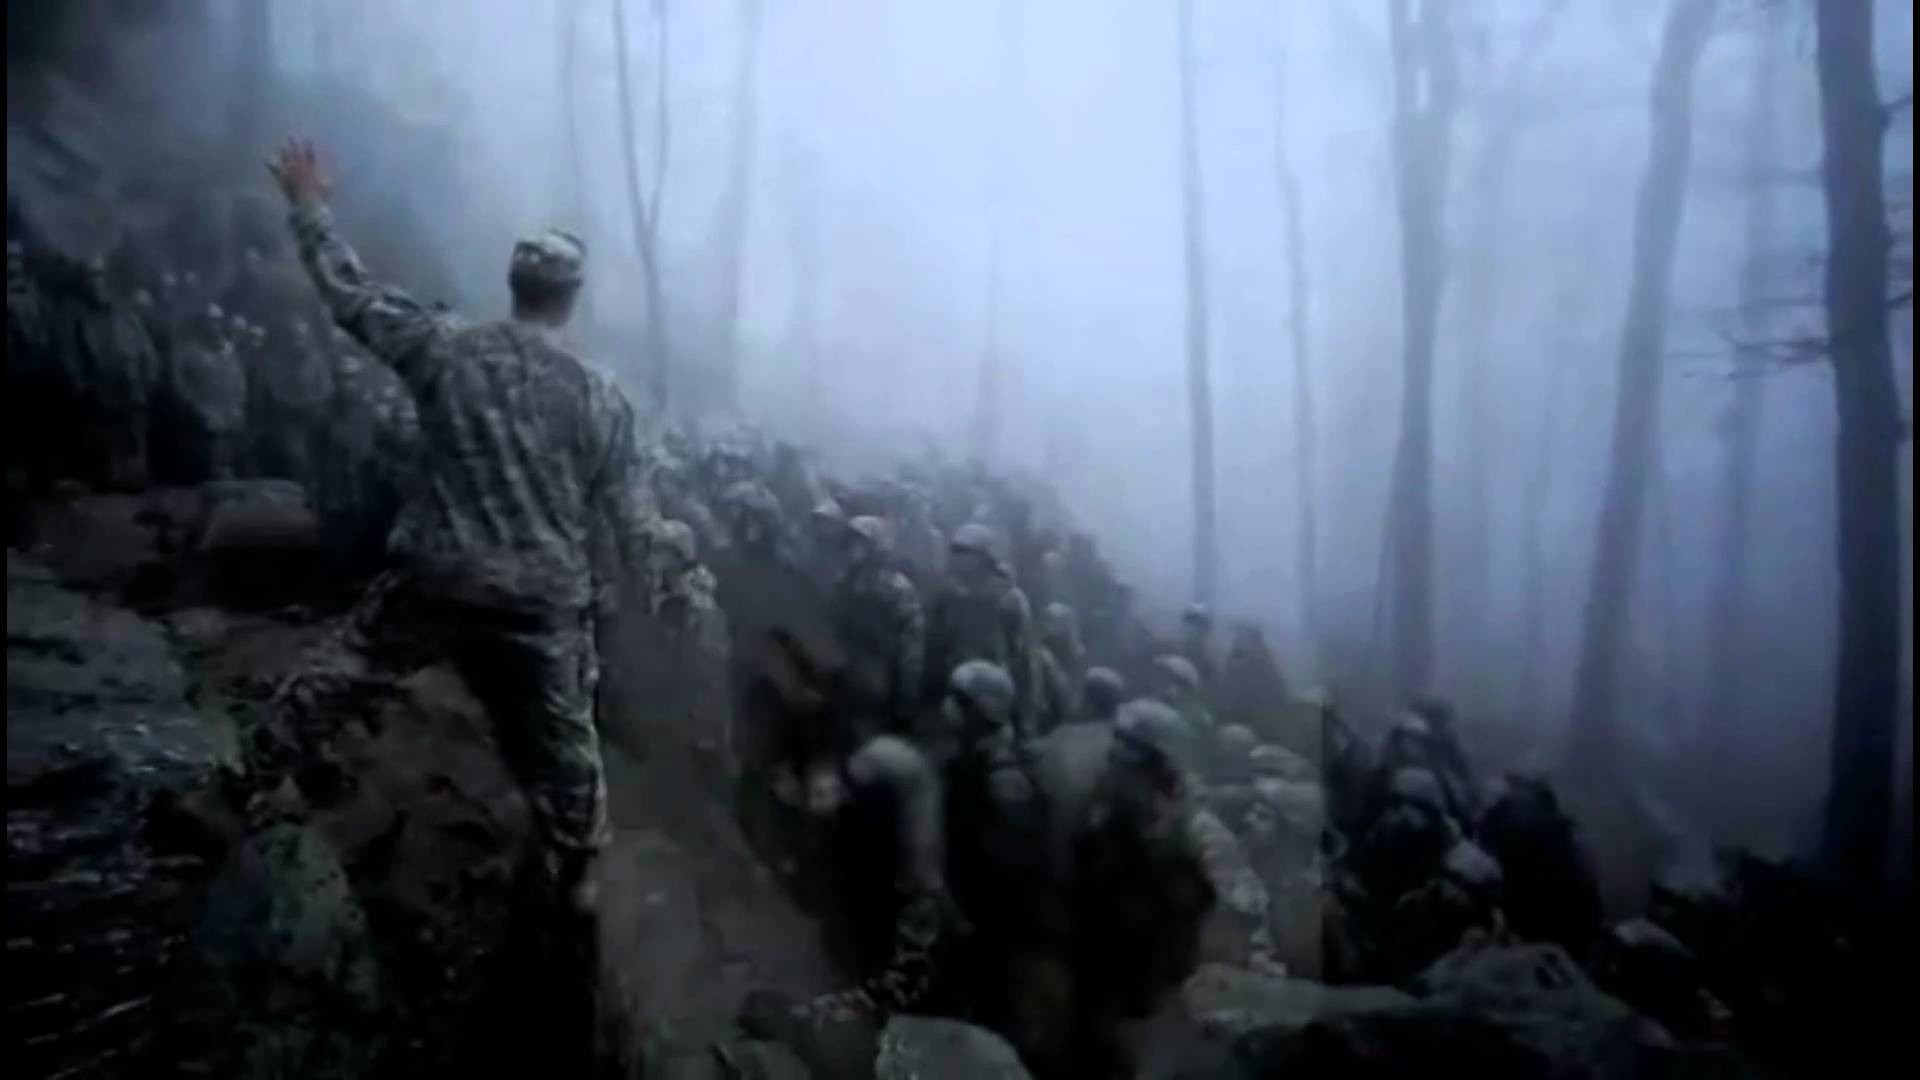 1920x1080 Army Ranger Training !!HARDCORE!! MUST SEE!!! HD!! - YouTube